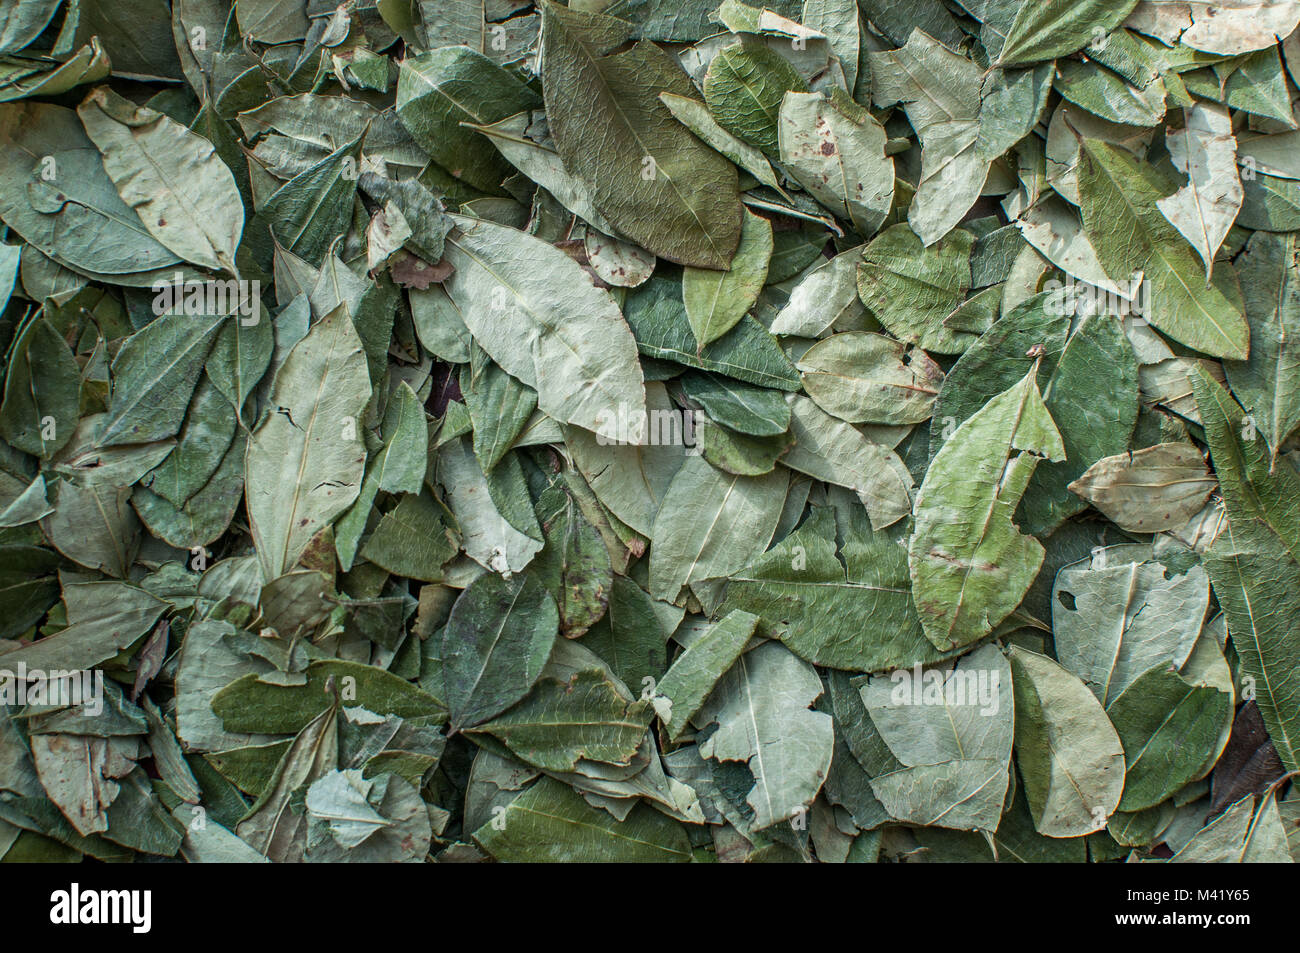 A pile of green leaves from the coca plant in Bolivia Stock Photo